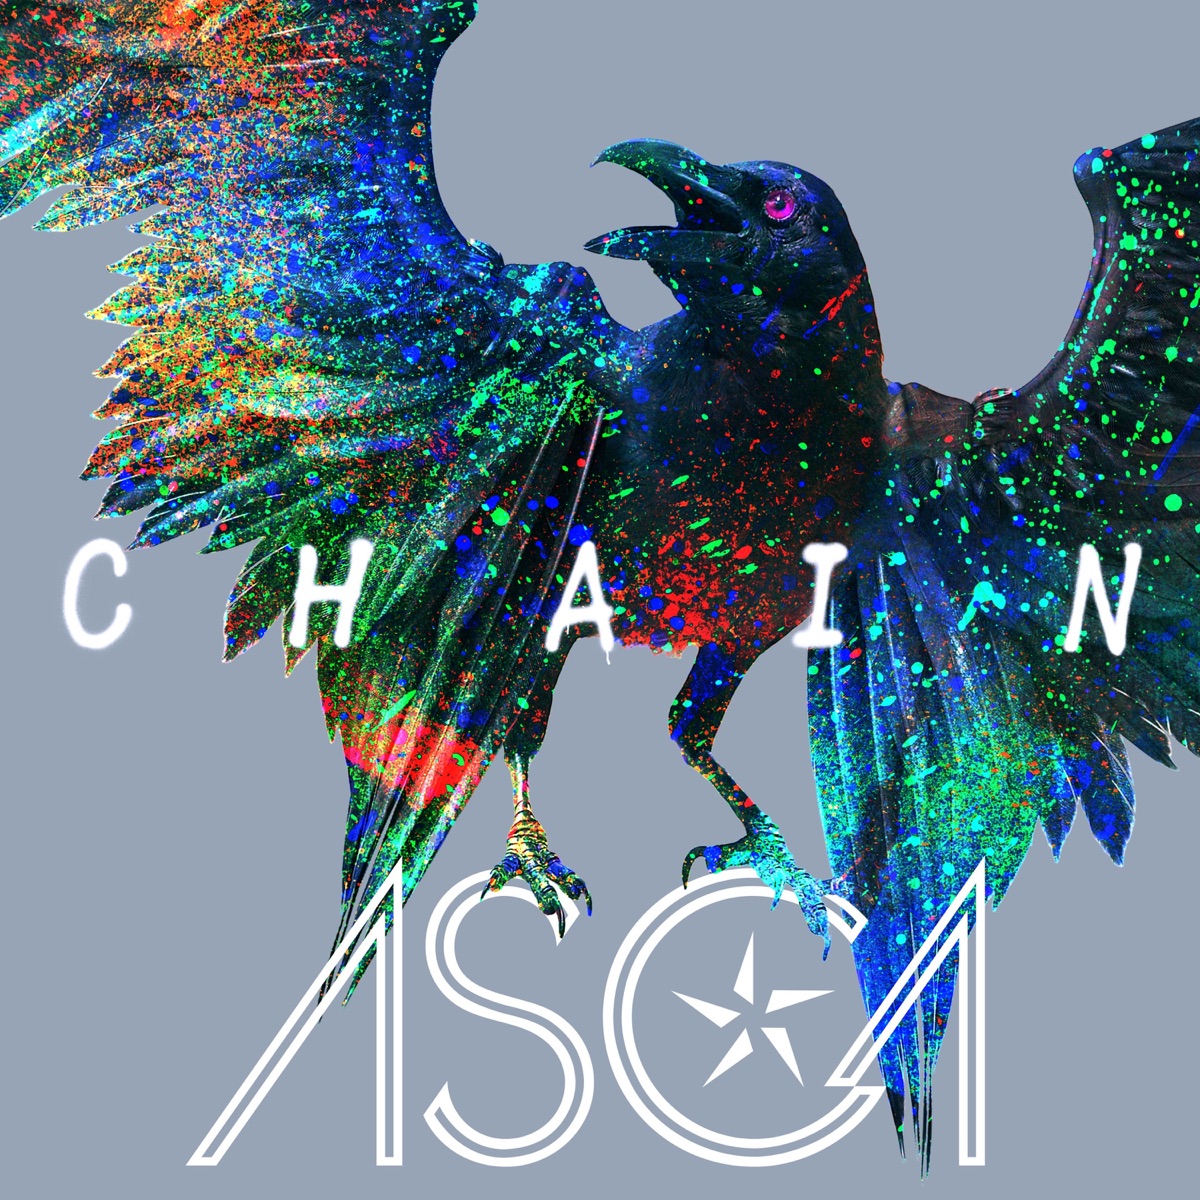 Cover for『ASCA - Don't disturb』from the release『CHAIN』